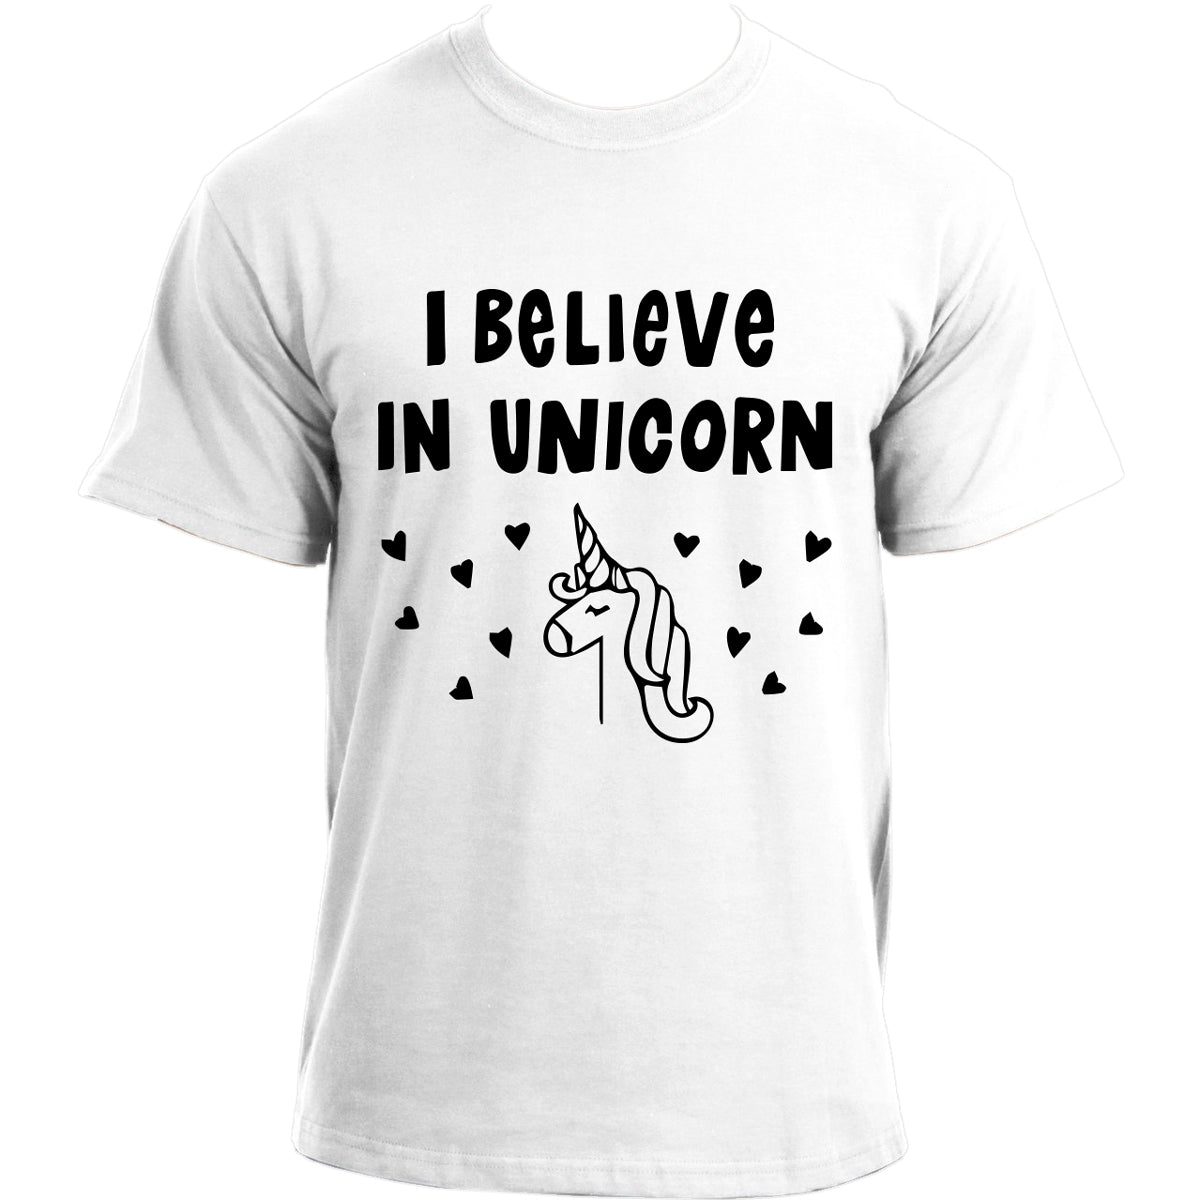 I believe in Unicorn Funny Novelty Party  T-Shirt